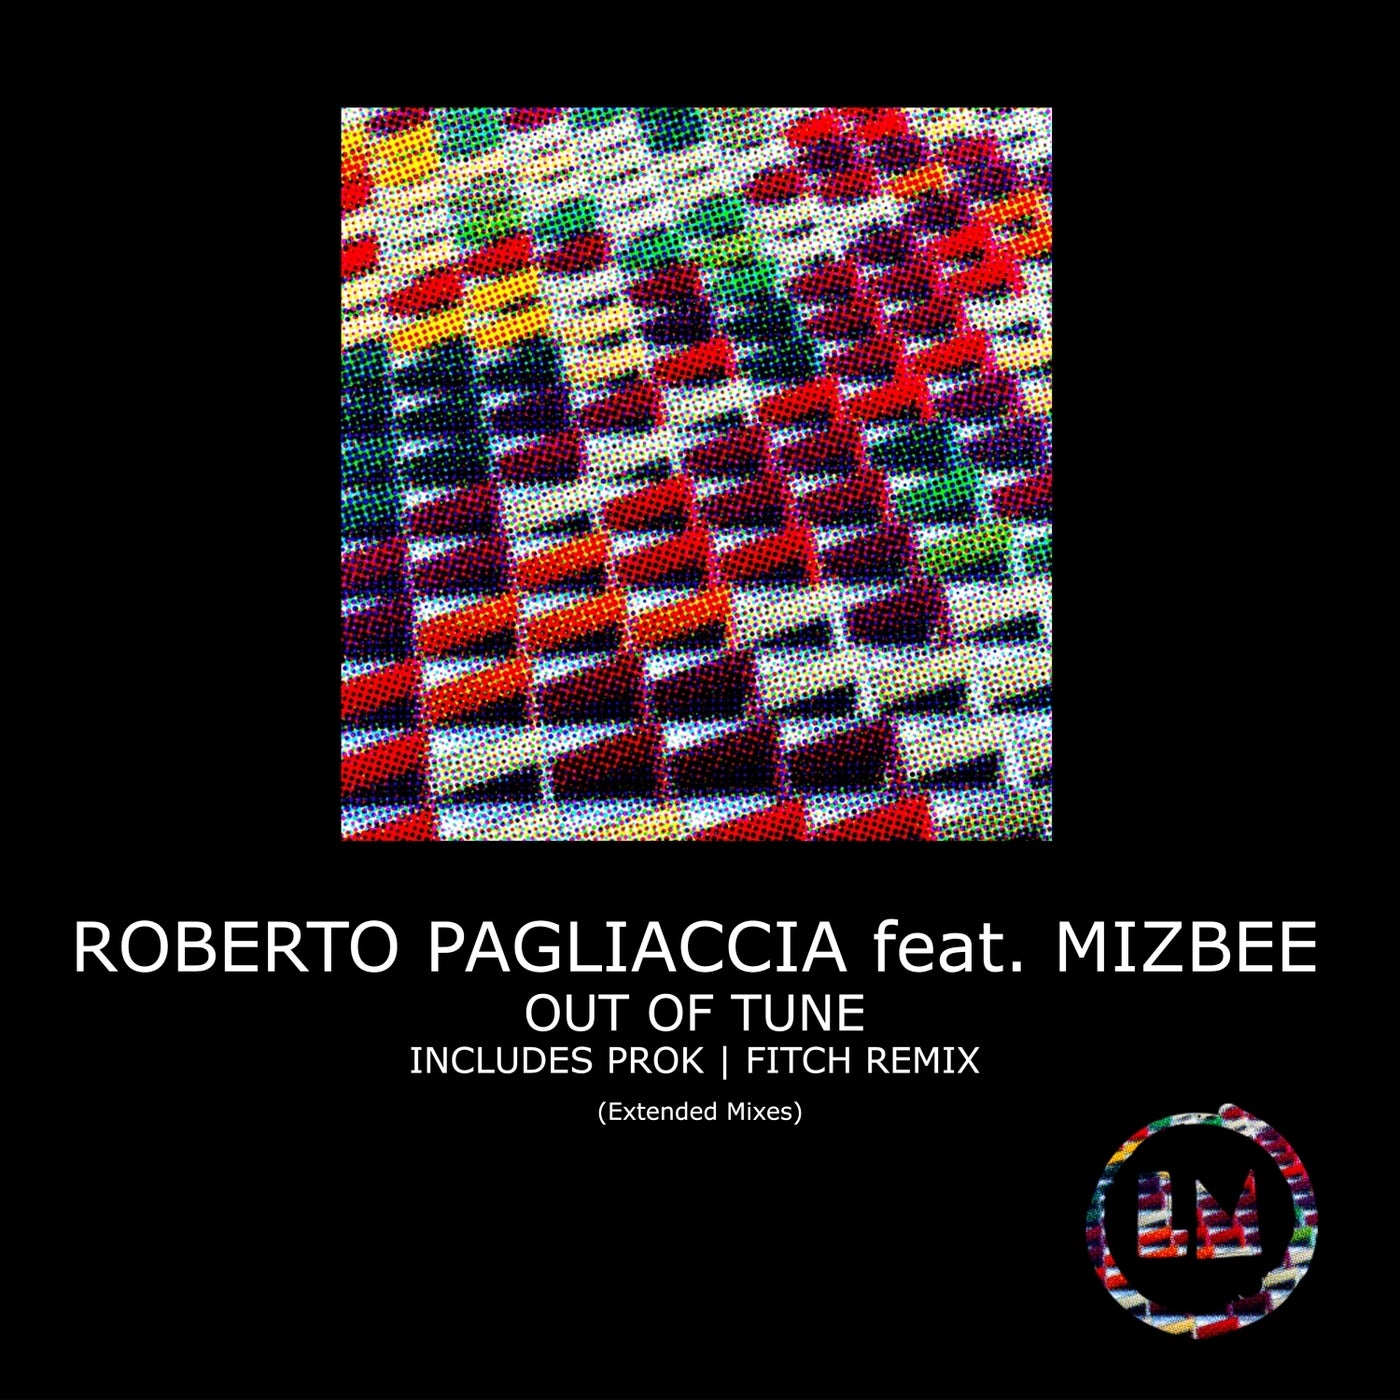 Roberto Pagliaccia Feat. Mizbee - Out Of Tune (extended Mix) on Revolution Radio